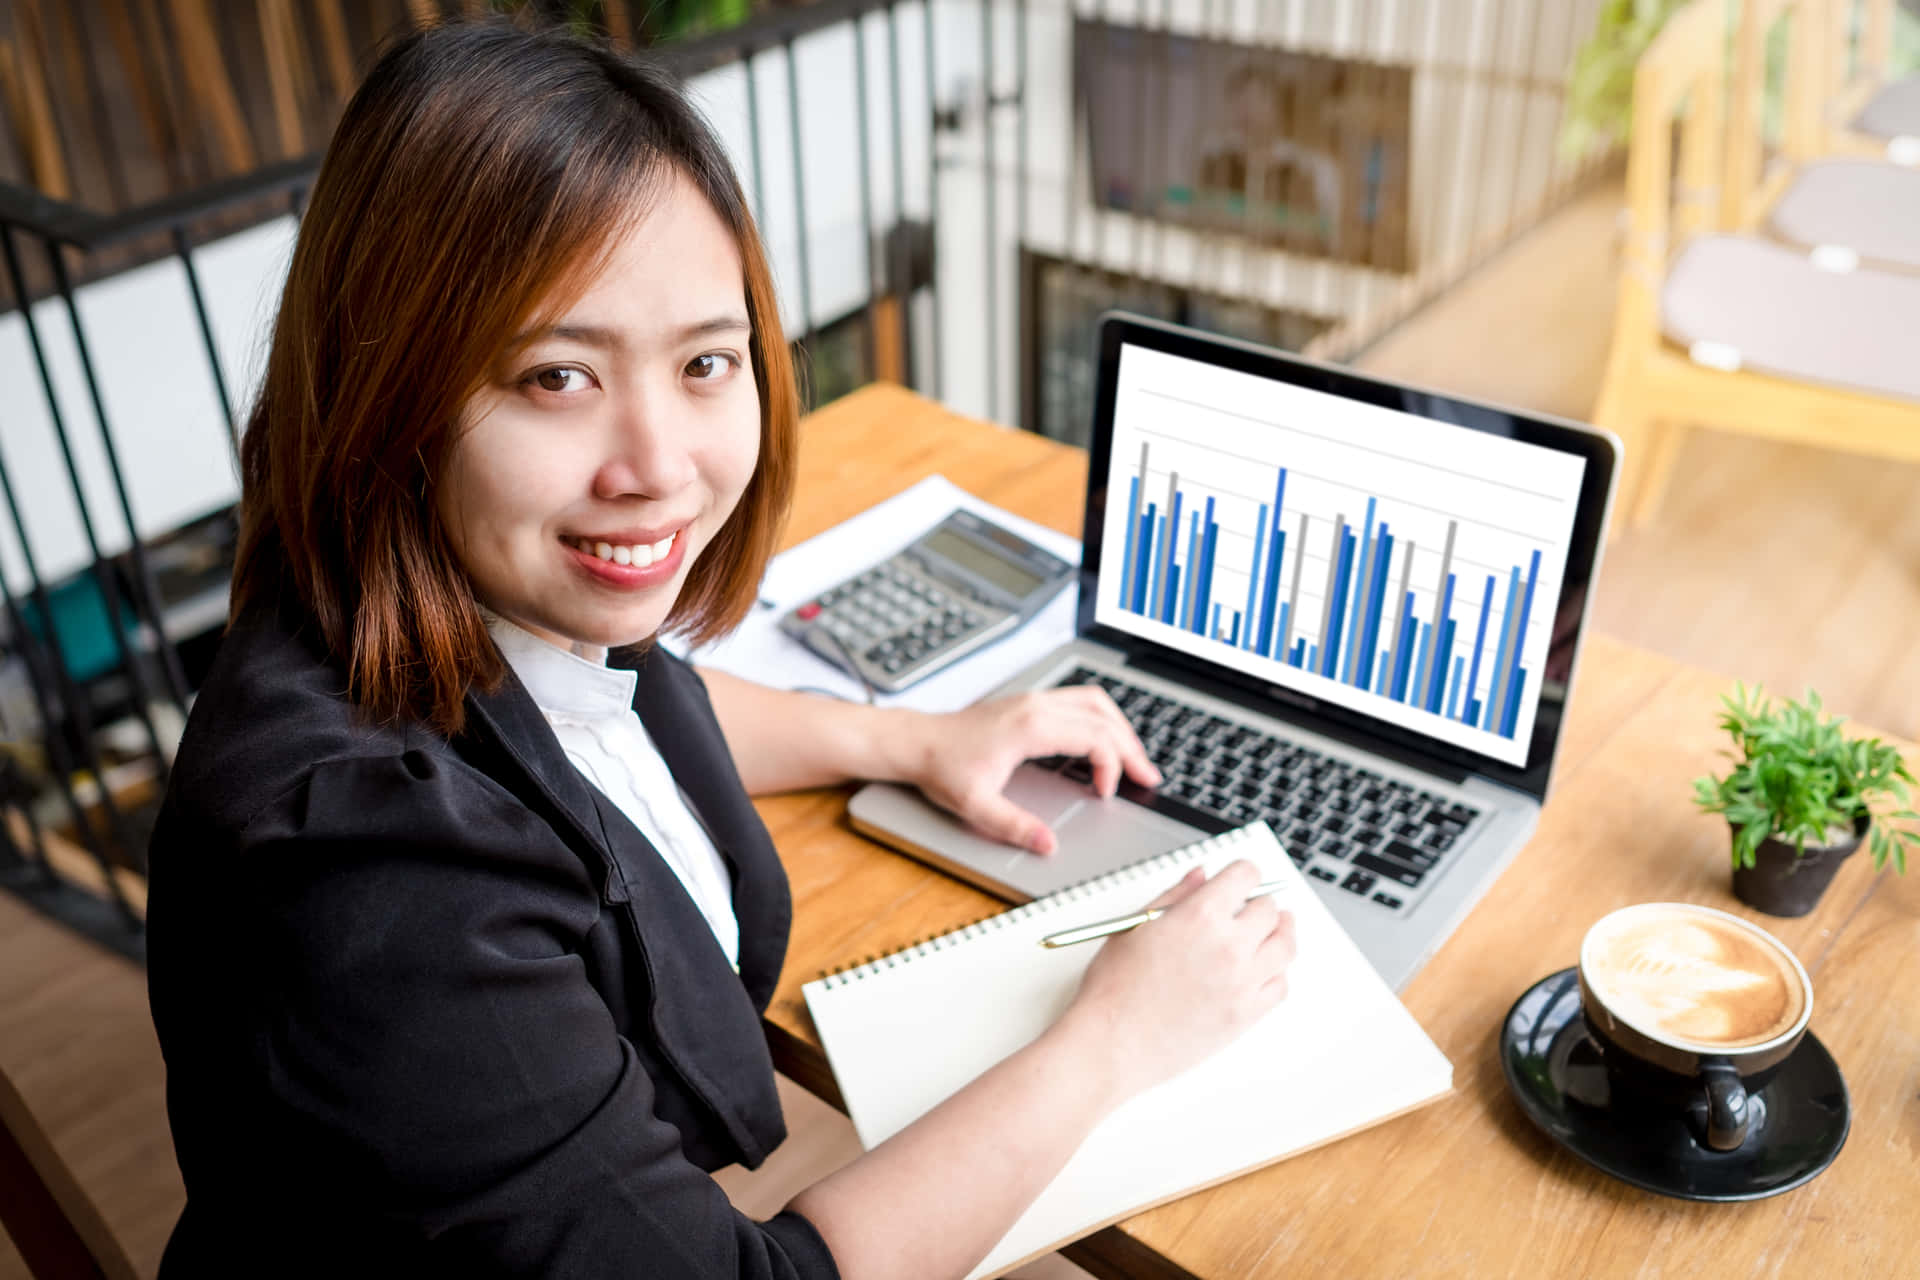 Asian Woman Sitting At A Desk With A Laptop And Graphs